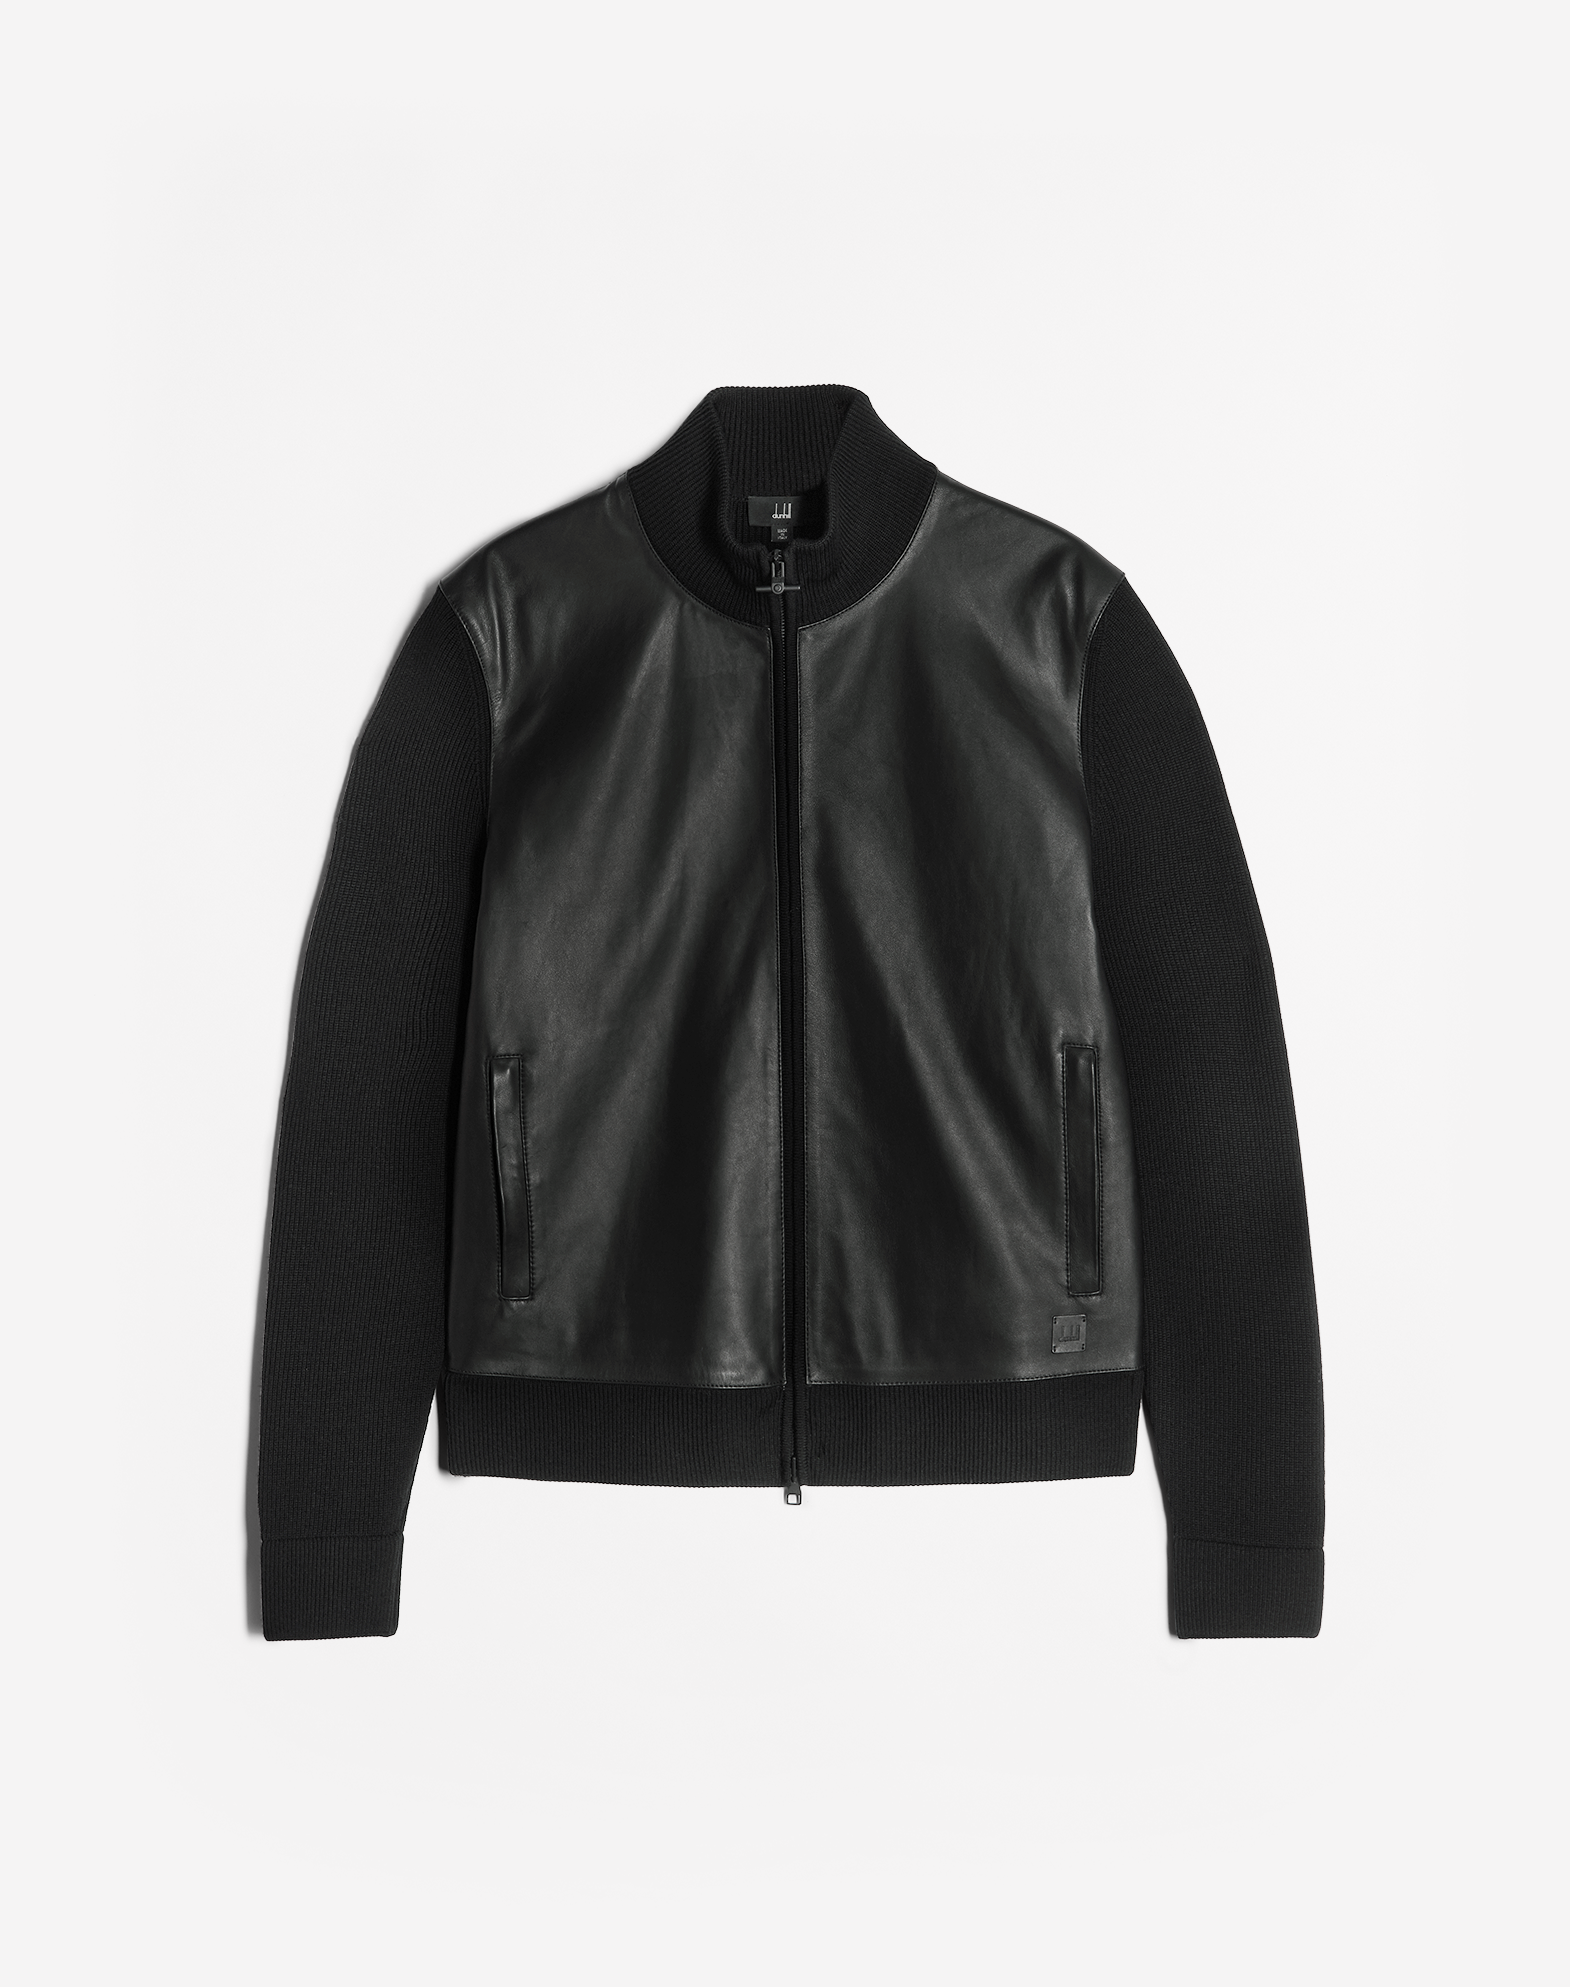 Dunhill Men's Leather Jackets